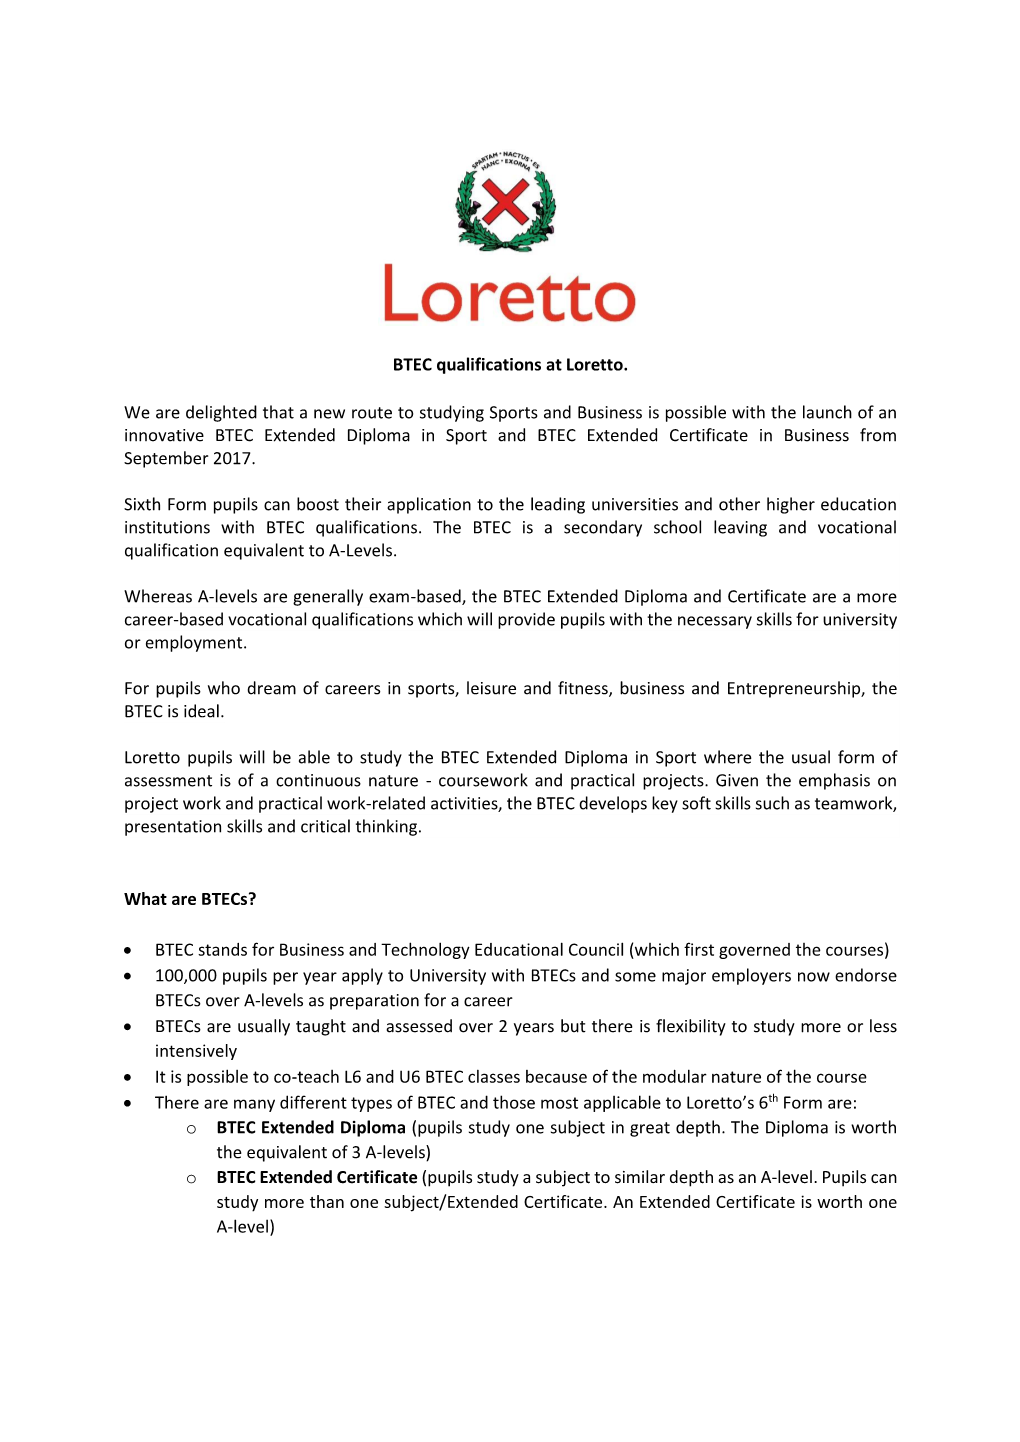 BTEC Qualifications at Loretto. We Are Delighted That a New Route To